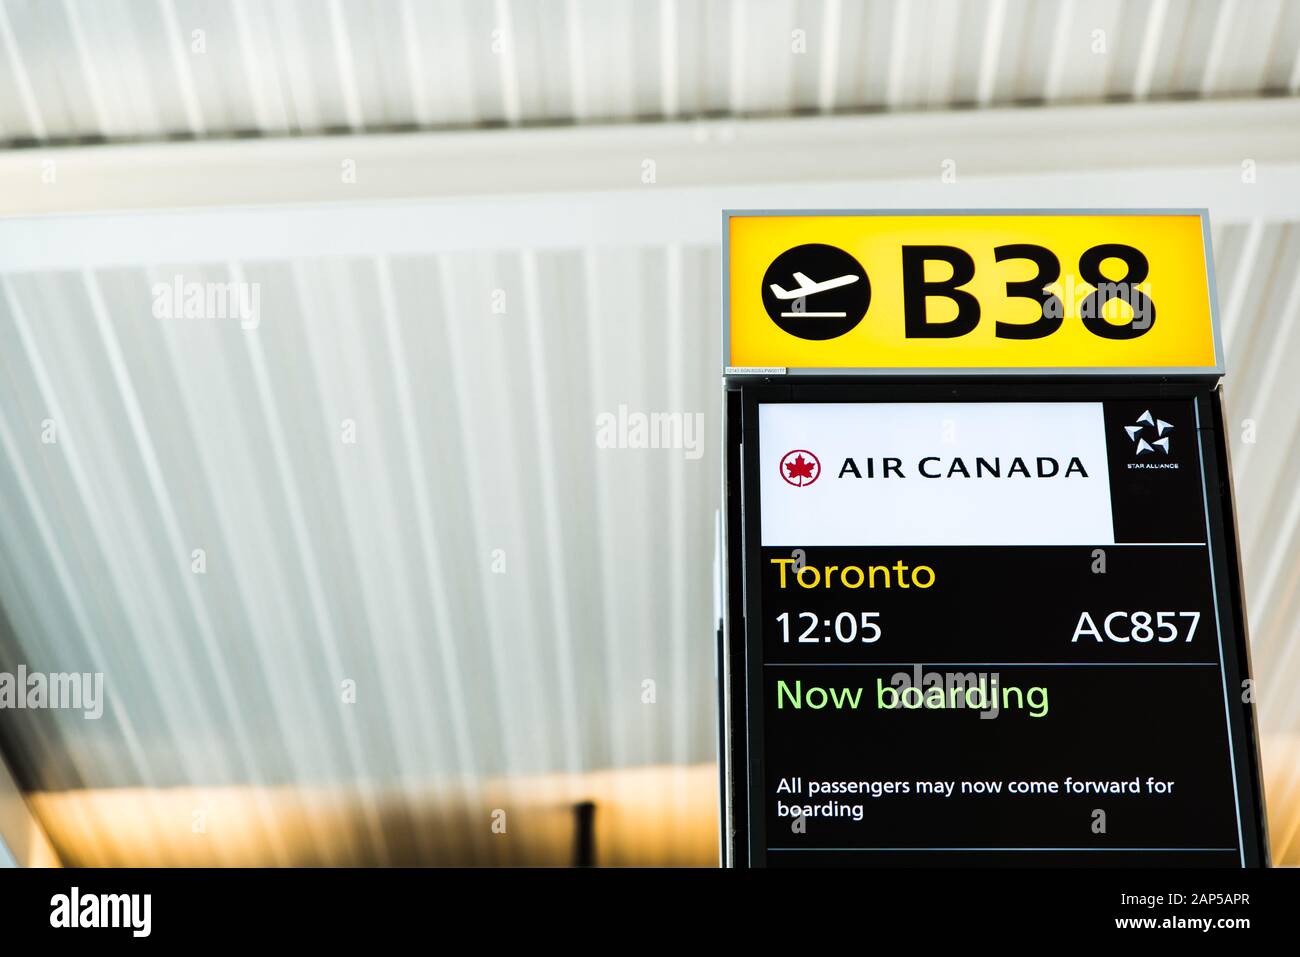 London, Heathrow Airport, Aug 2019: Gate B38 open for boarding. Flight announcement displayed on screen. Flying to Toronto with Air Canada Stock Photo